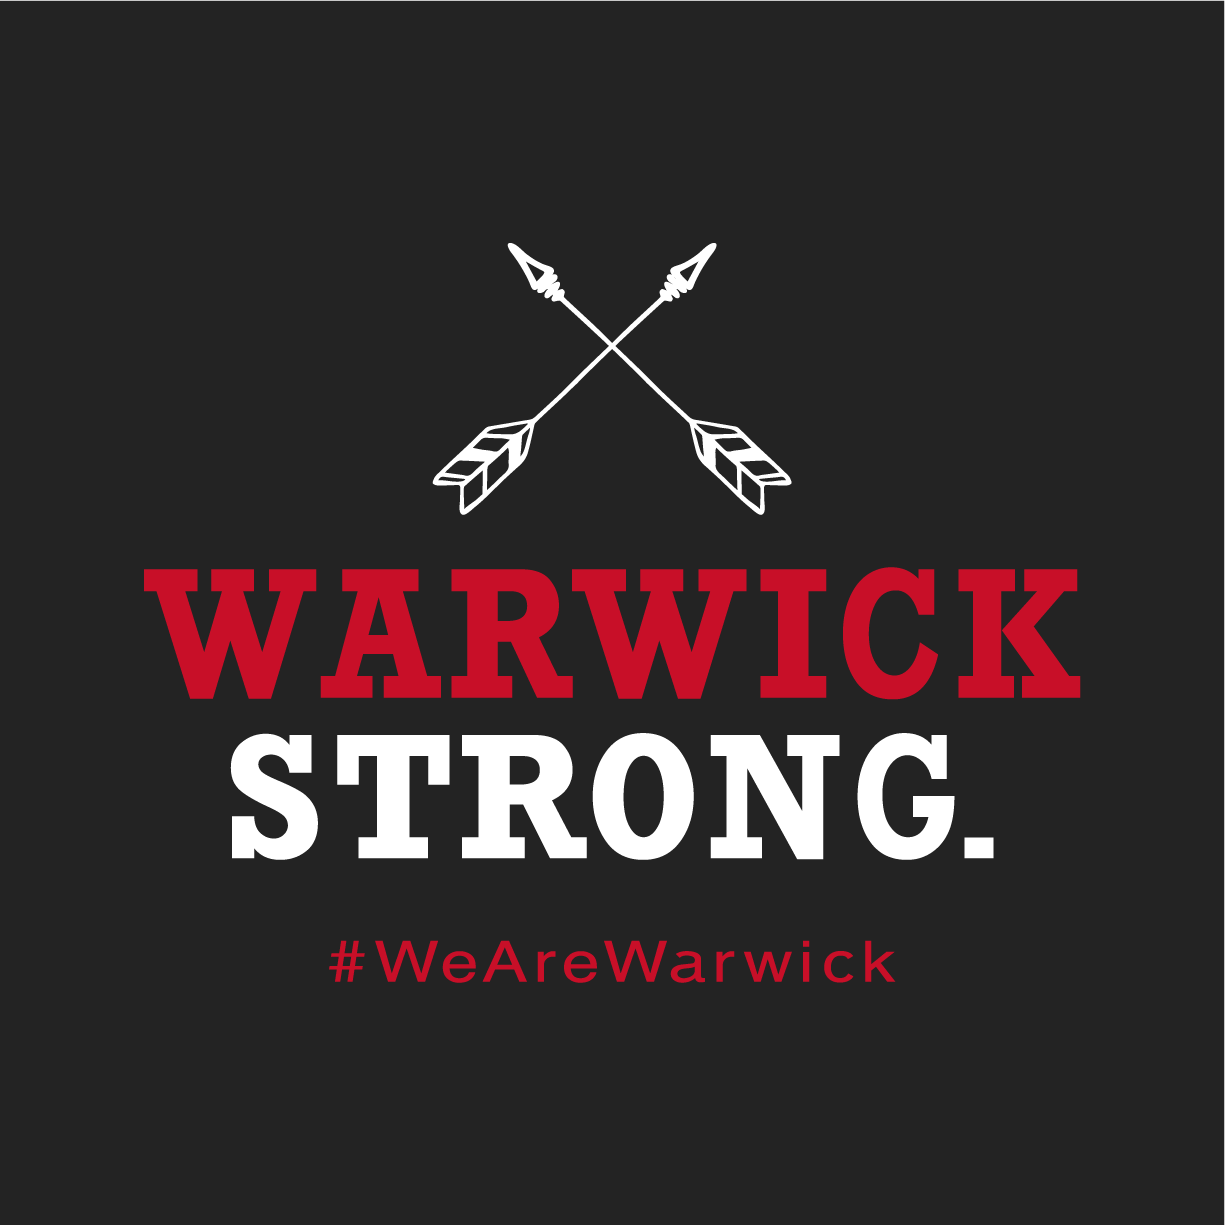 We Are Warwick shirt design - zoomed